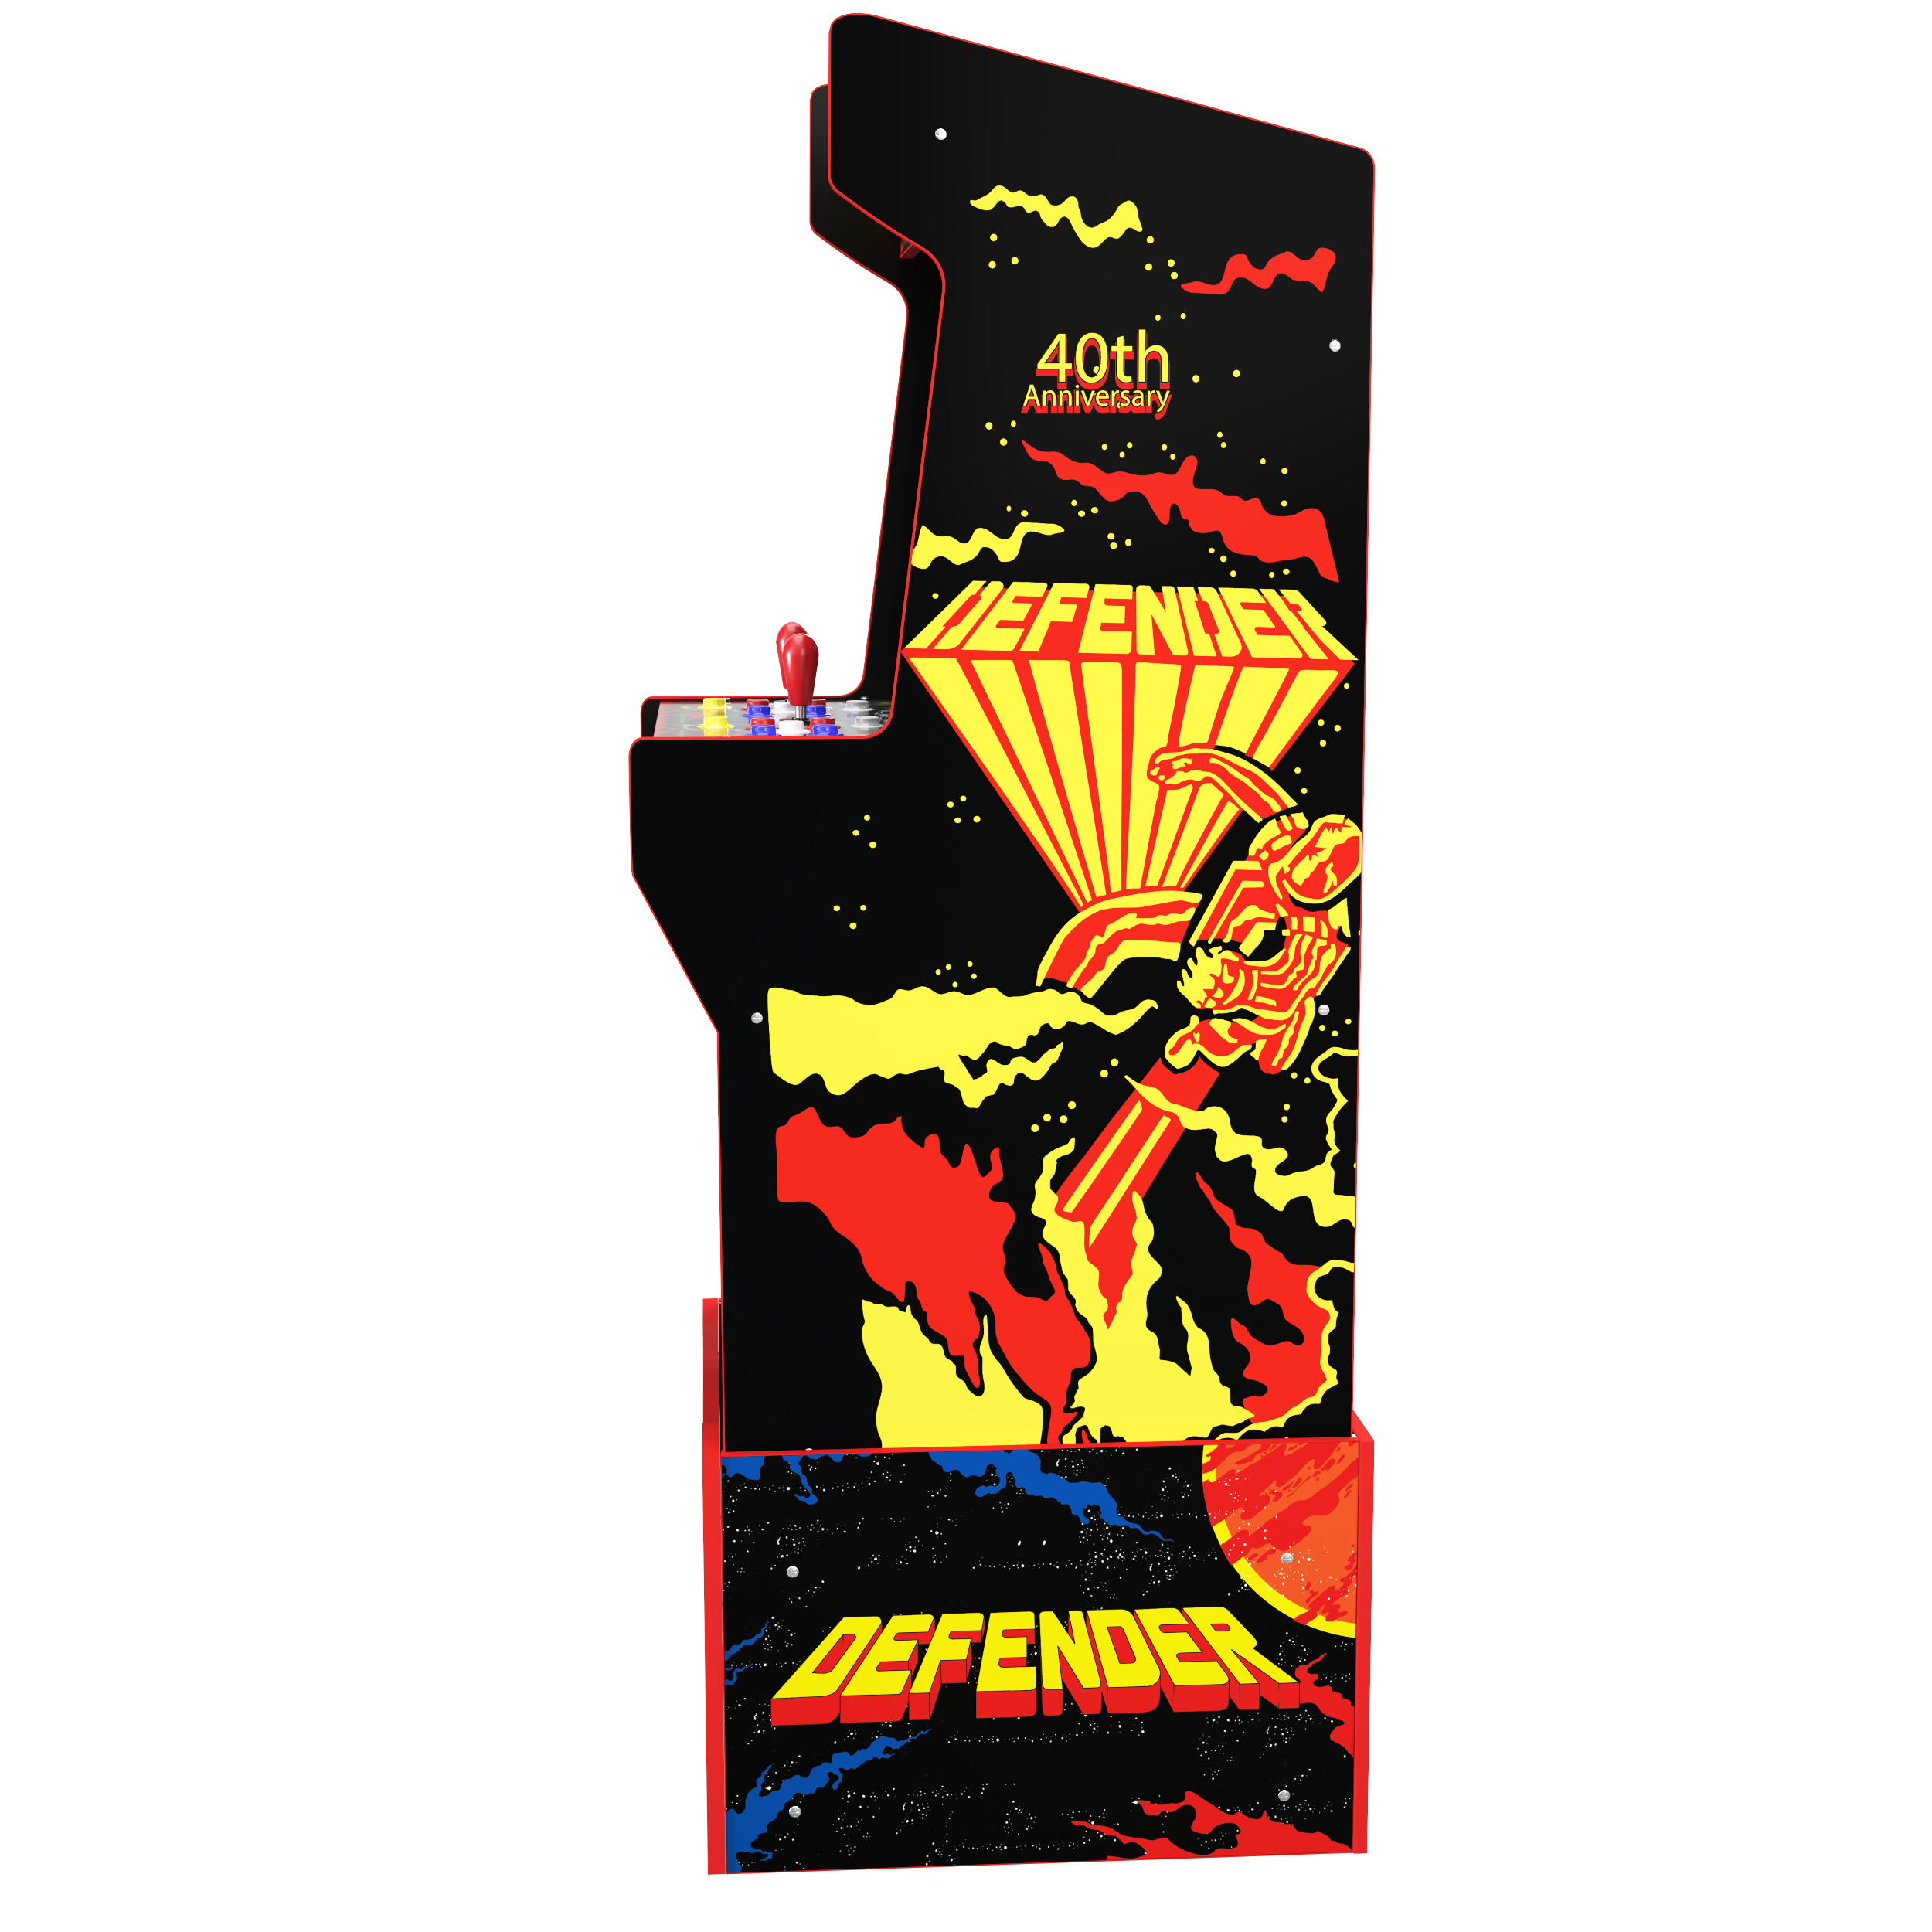 Defender 40th Anniversary 12-IN-1 Midway Legacy Edition Arcade with Licensed Riser and Light-Up Marquee, Arcade1Up - image 5 of 6